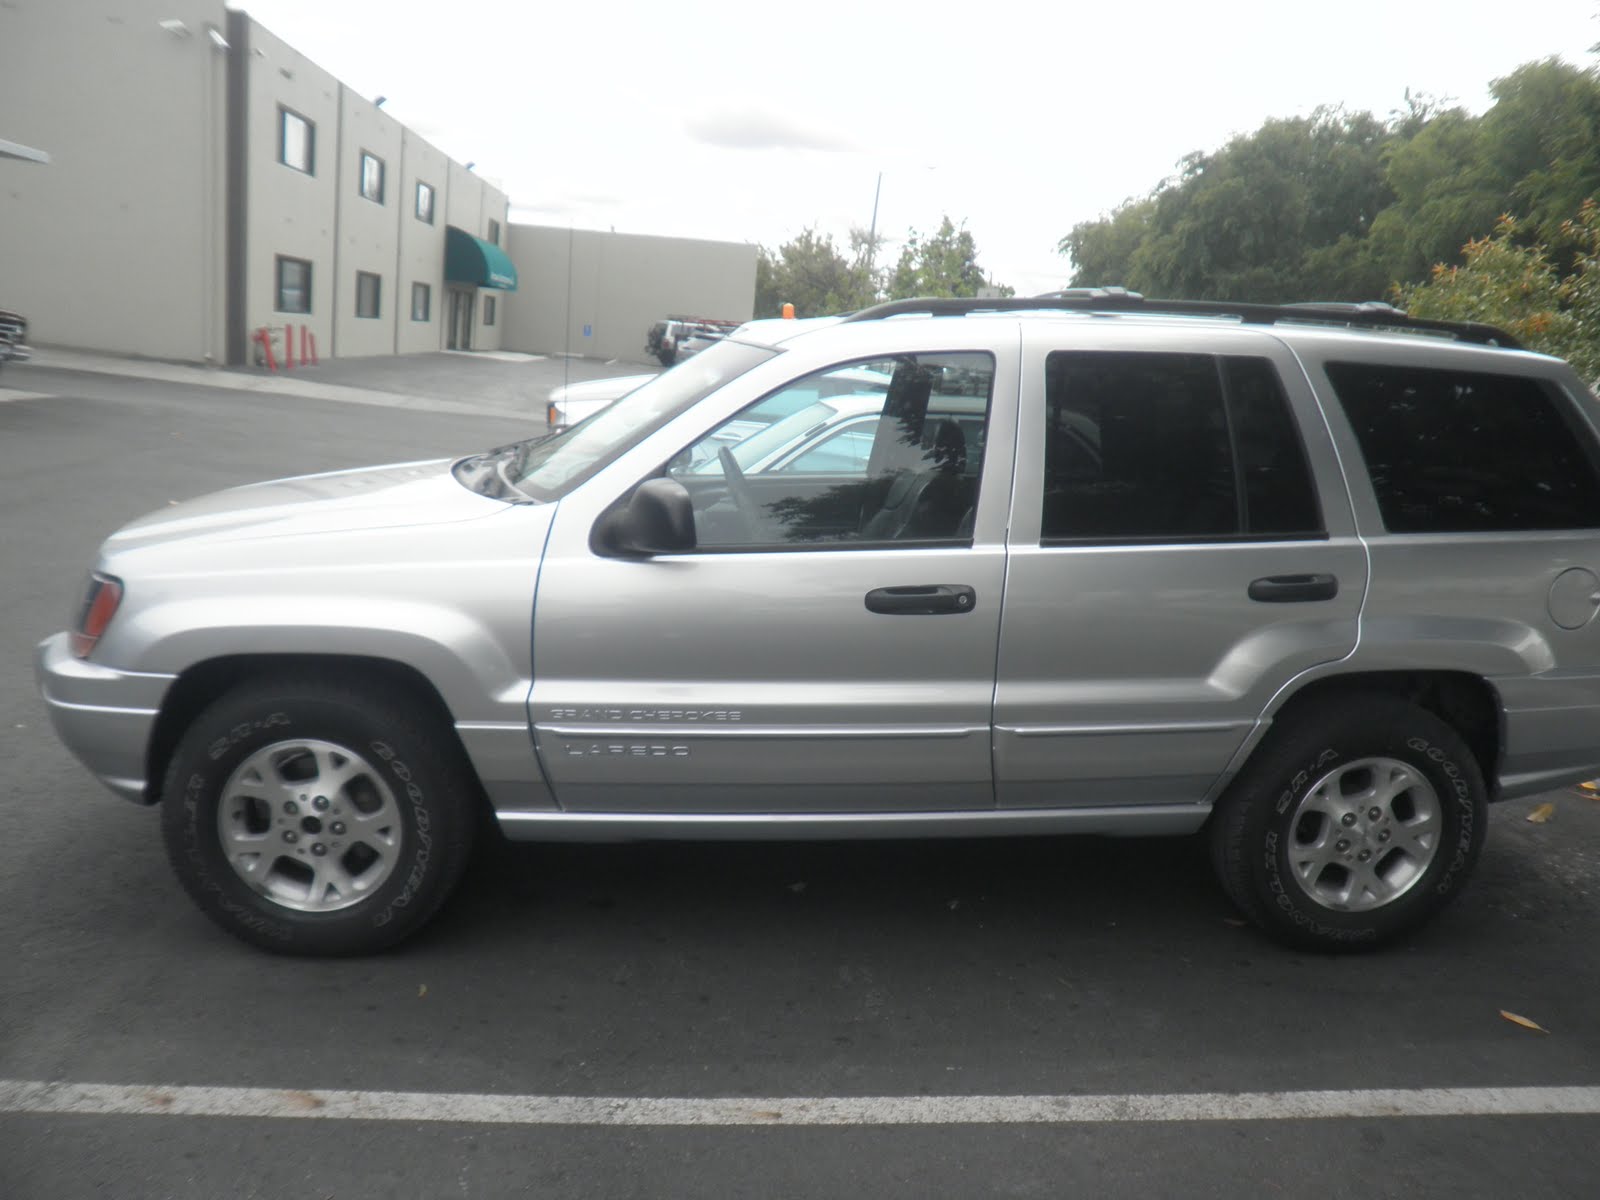 1999 Jeep cherokee paint colors